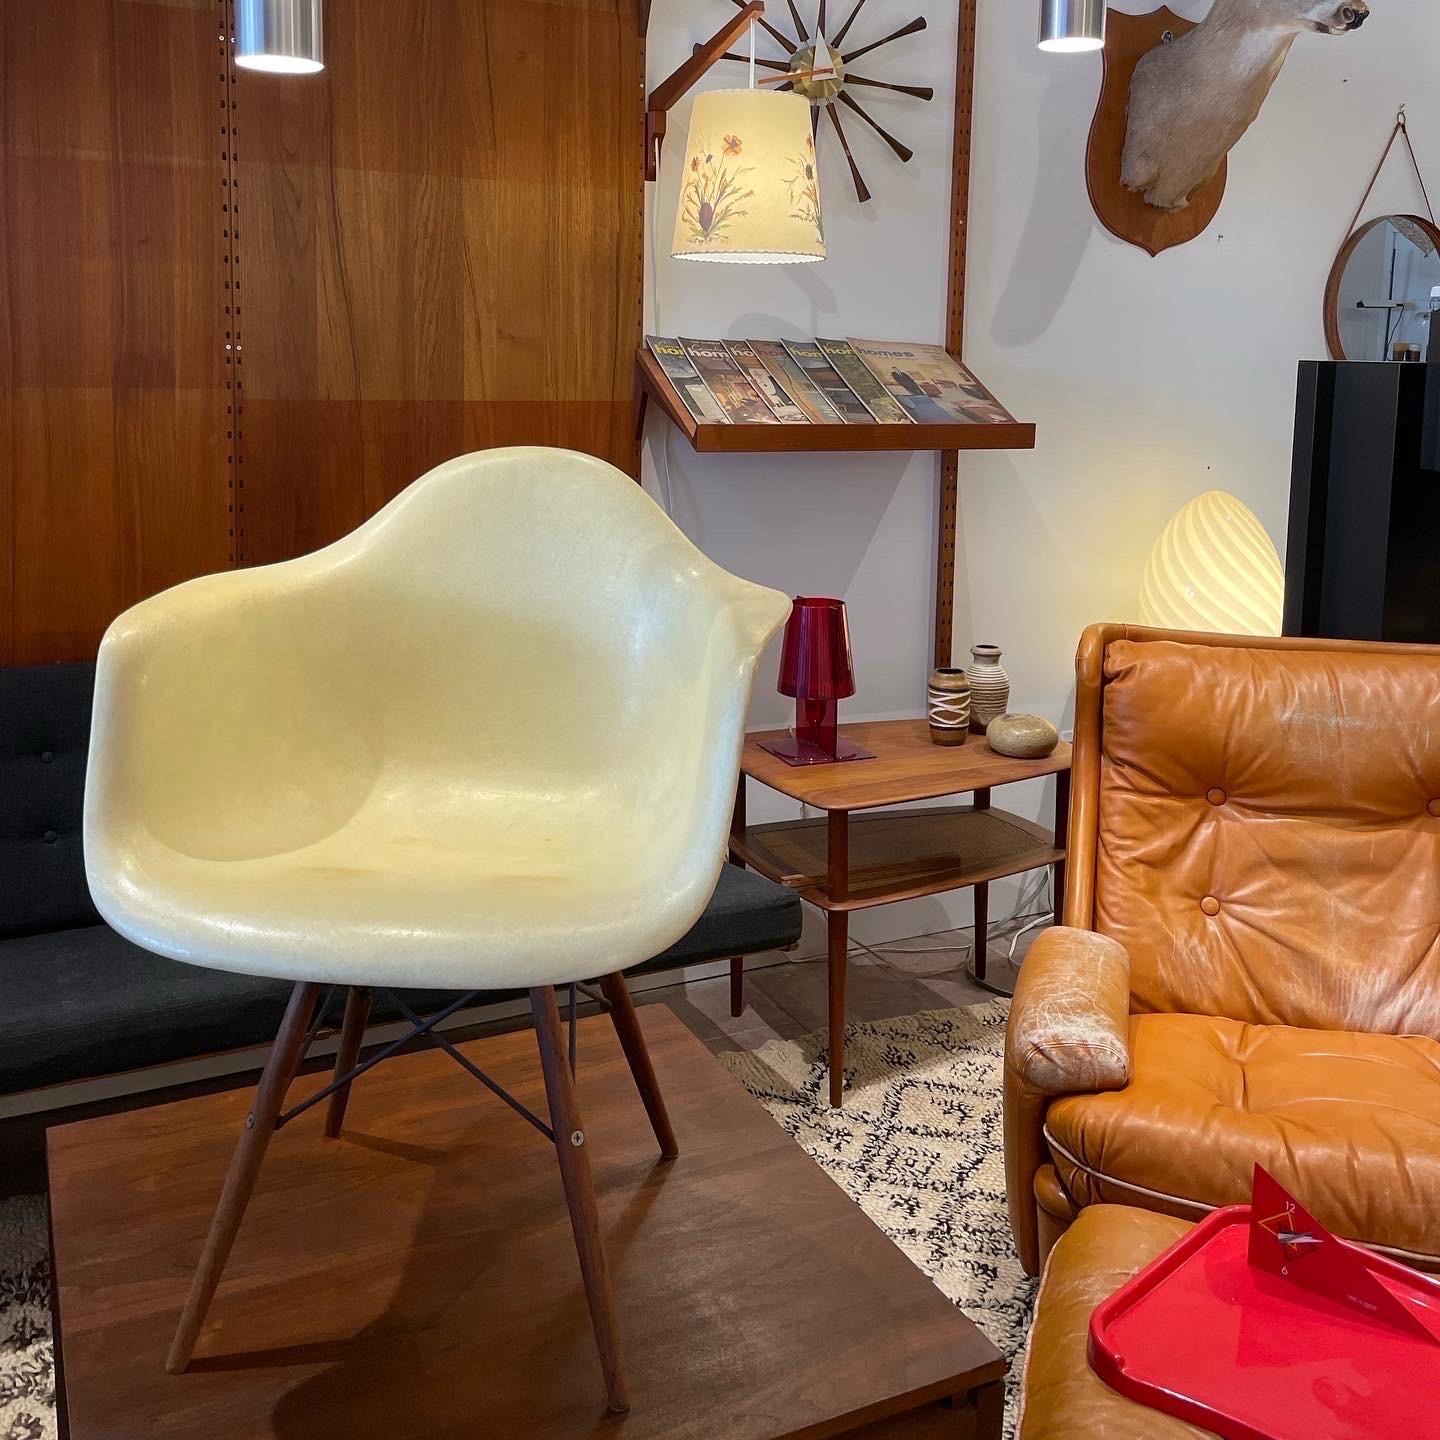 Exceedingly rare early production of the Herman Miller rope edge armchair as designed by Charles Eames. Fiberglass shell produced by Zenith Plastics for Herman Miller, original walnut dowel legs. 

In excellent condition for it’s age, the only